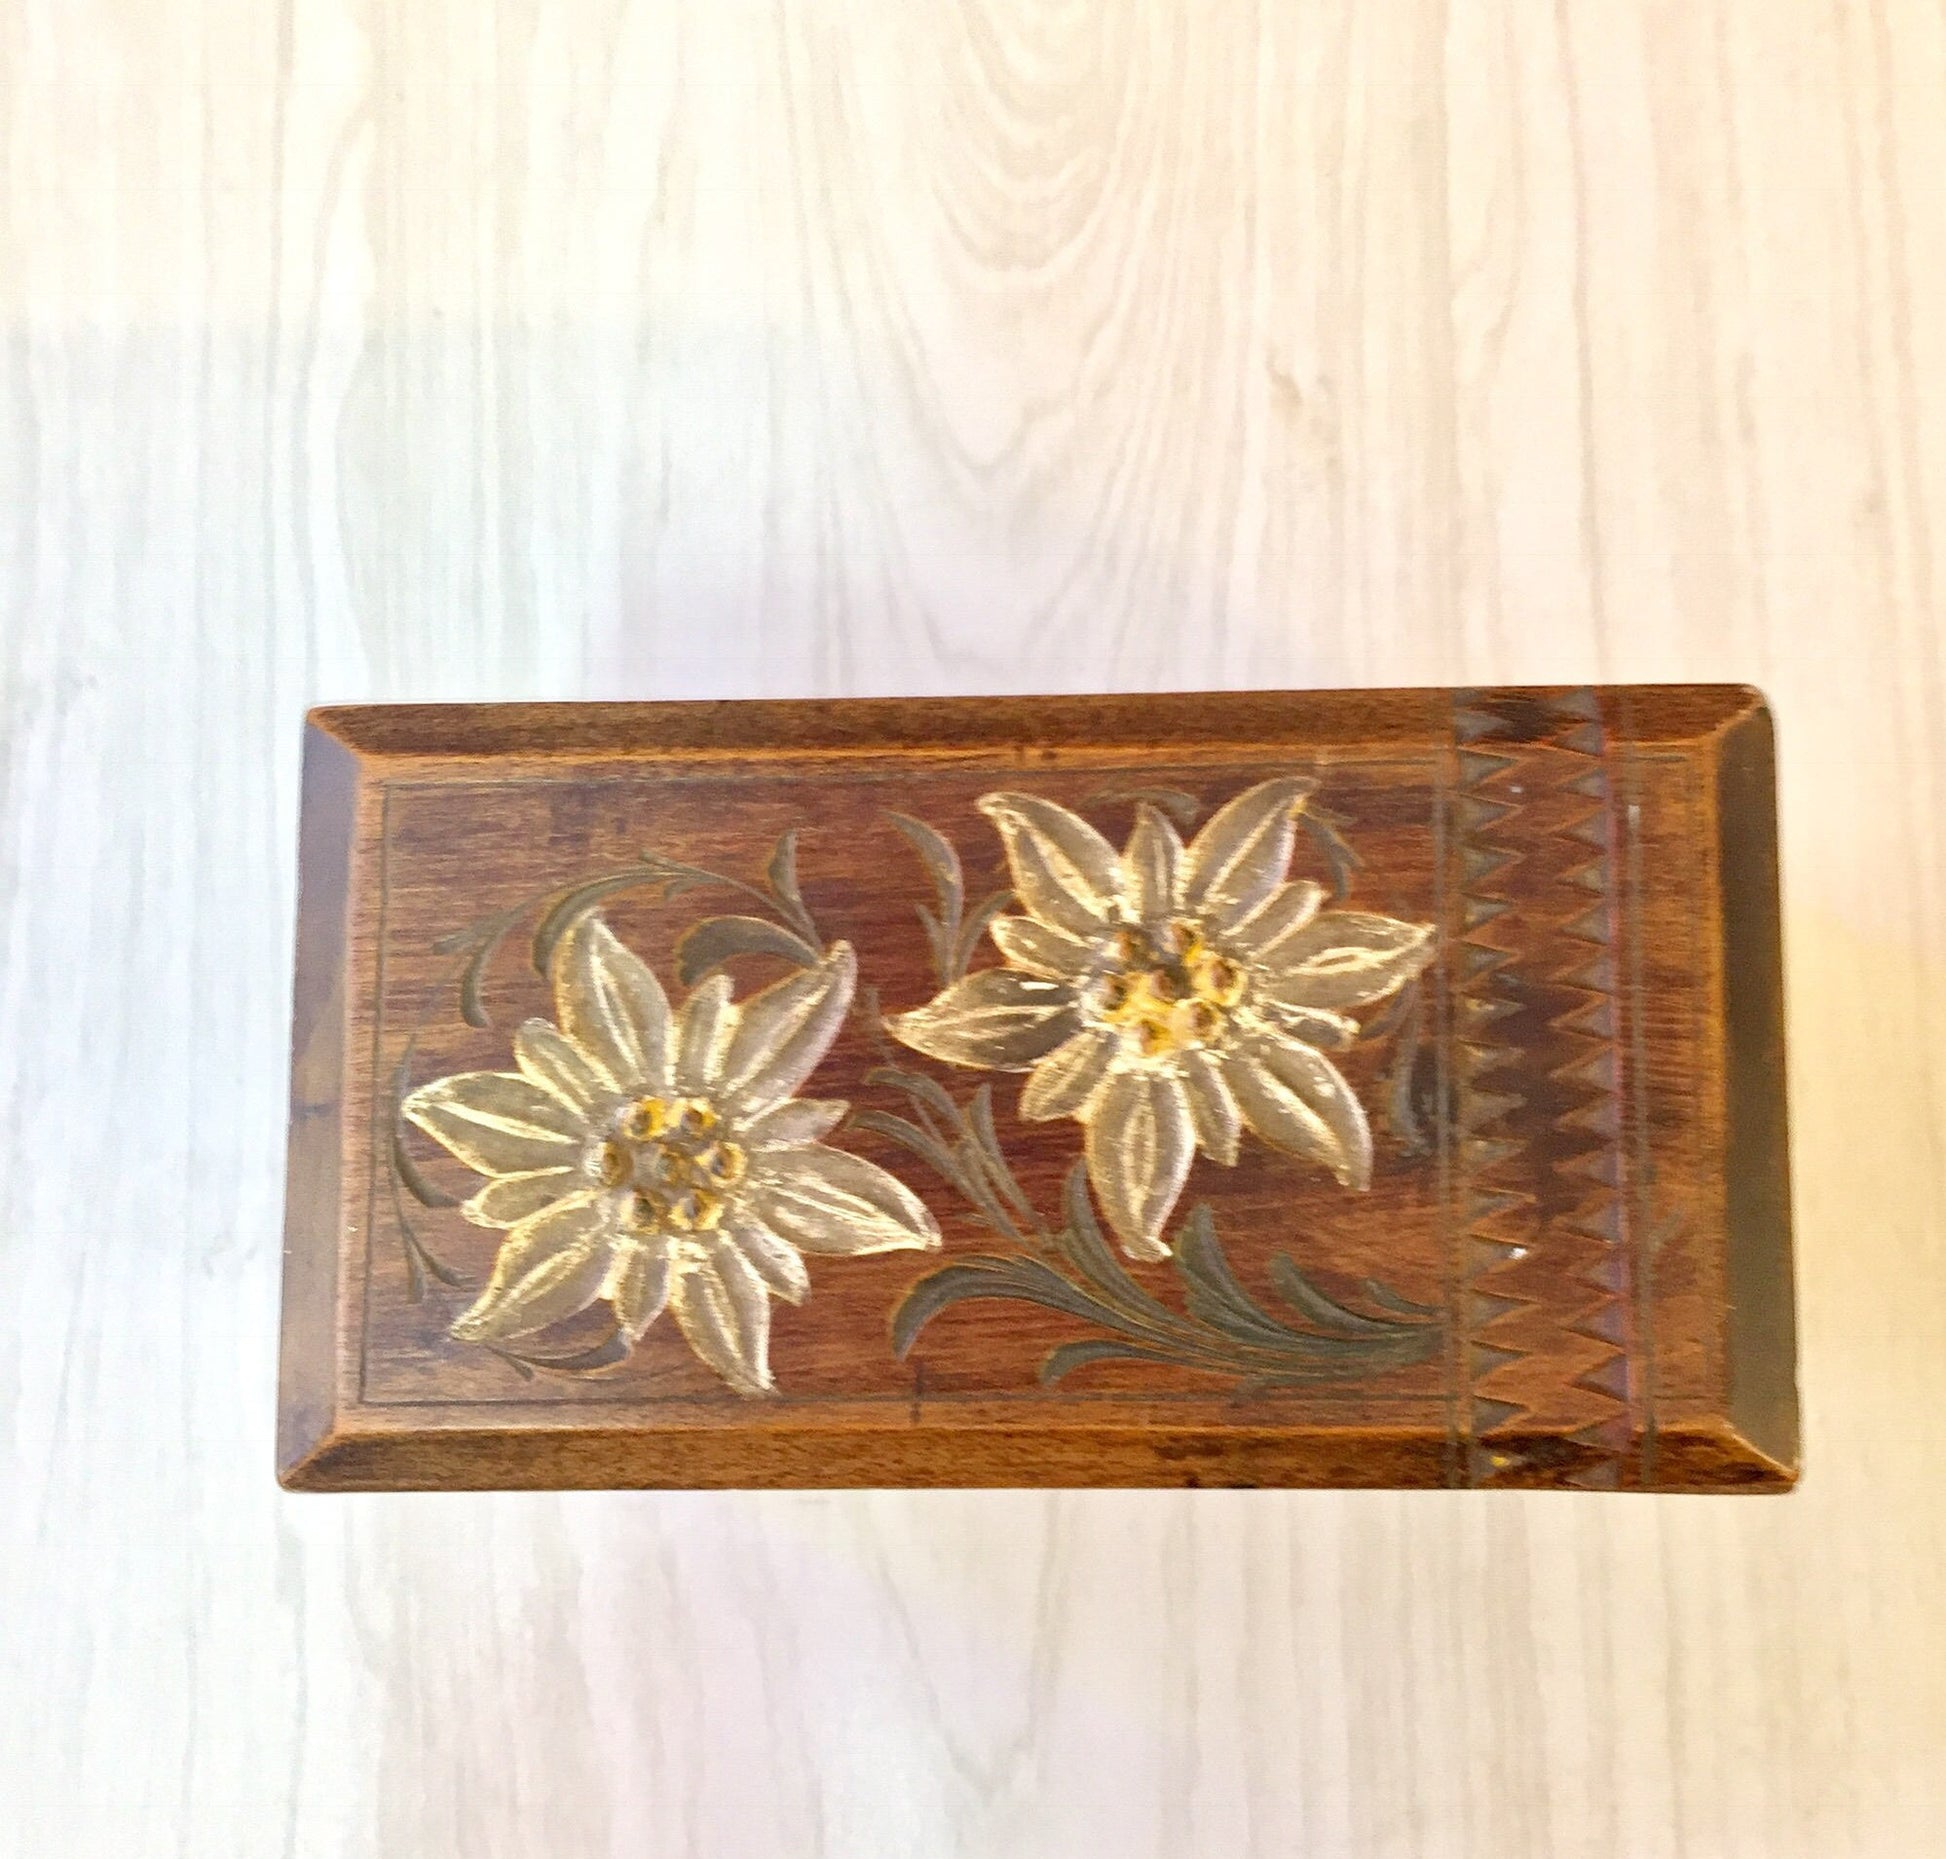 Carved wooden box with floral design on lid featuring two white flowers against a dark stained wood background.